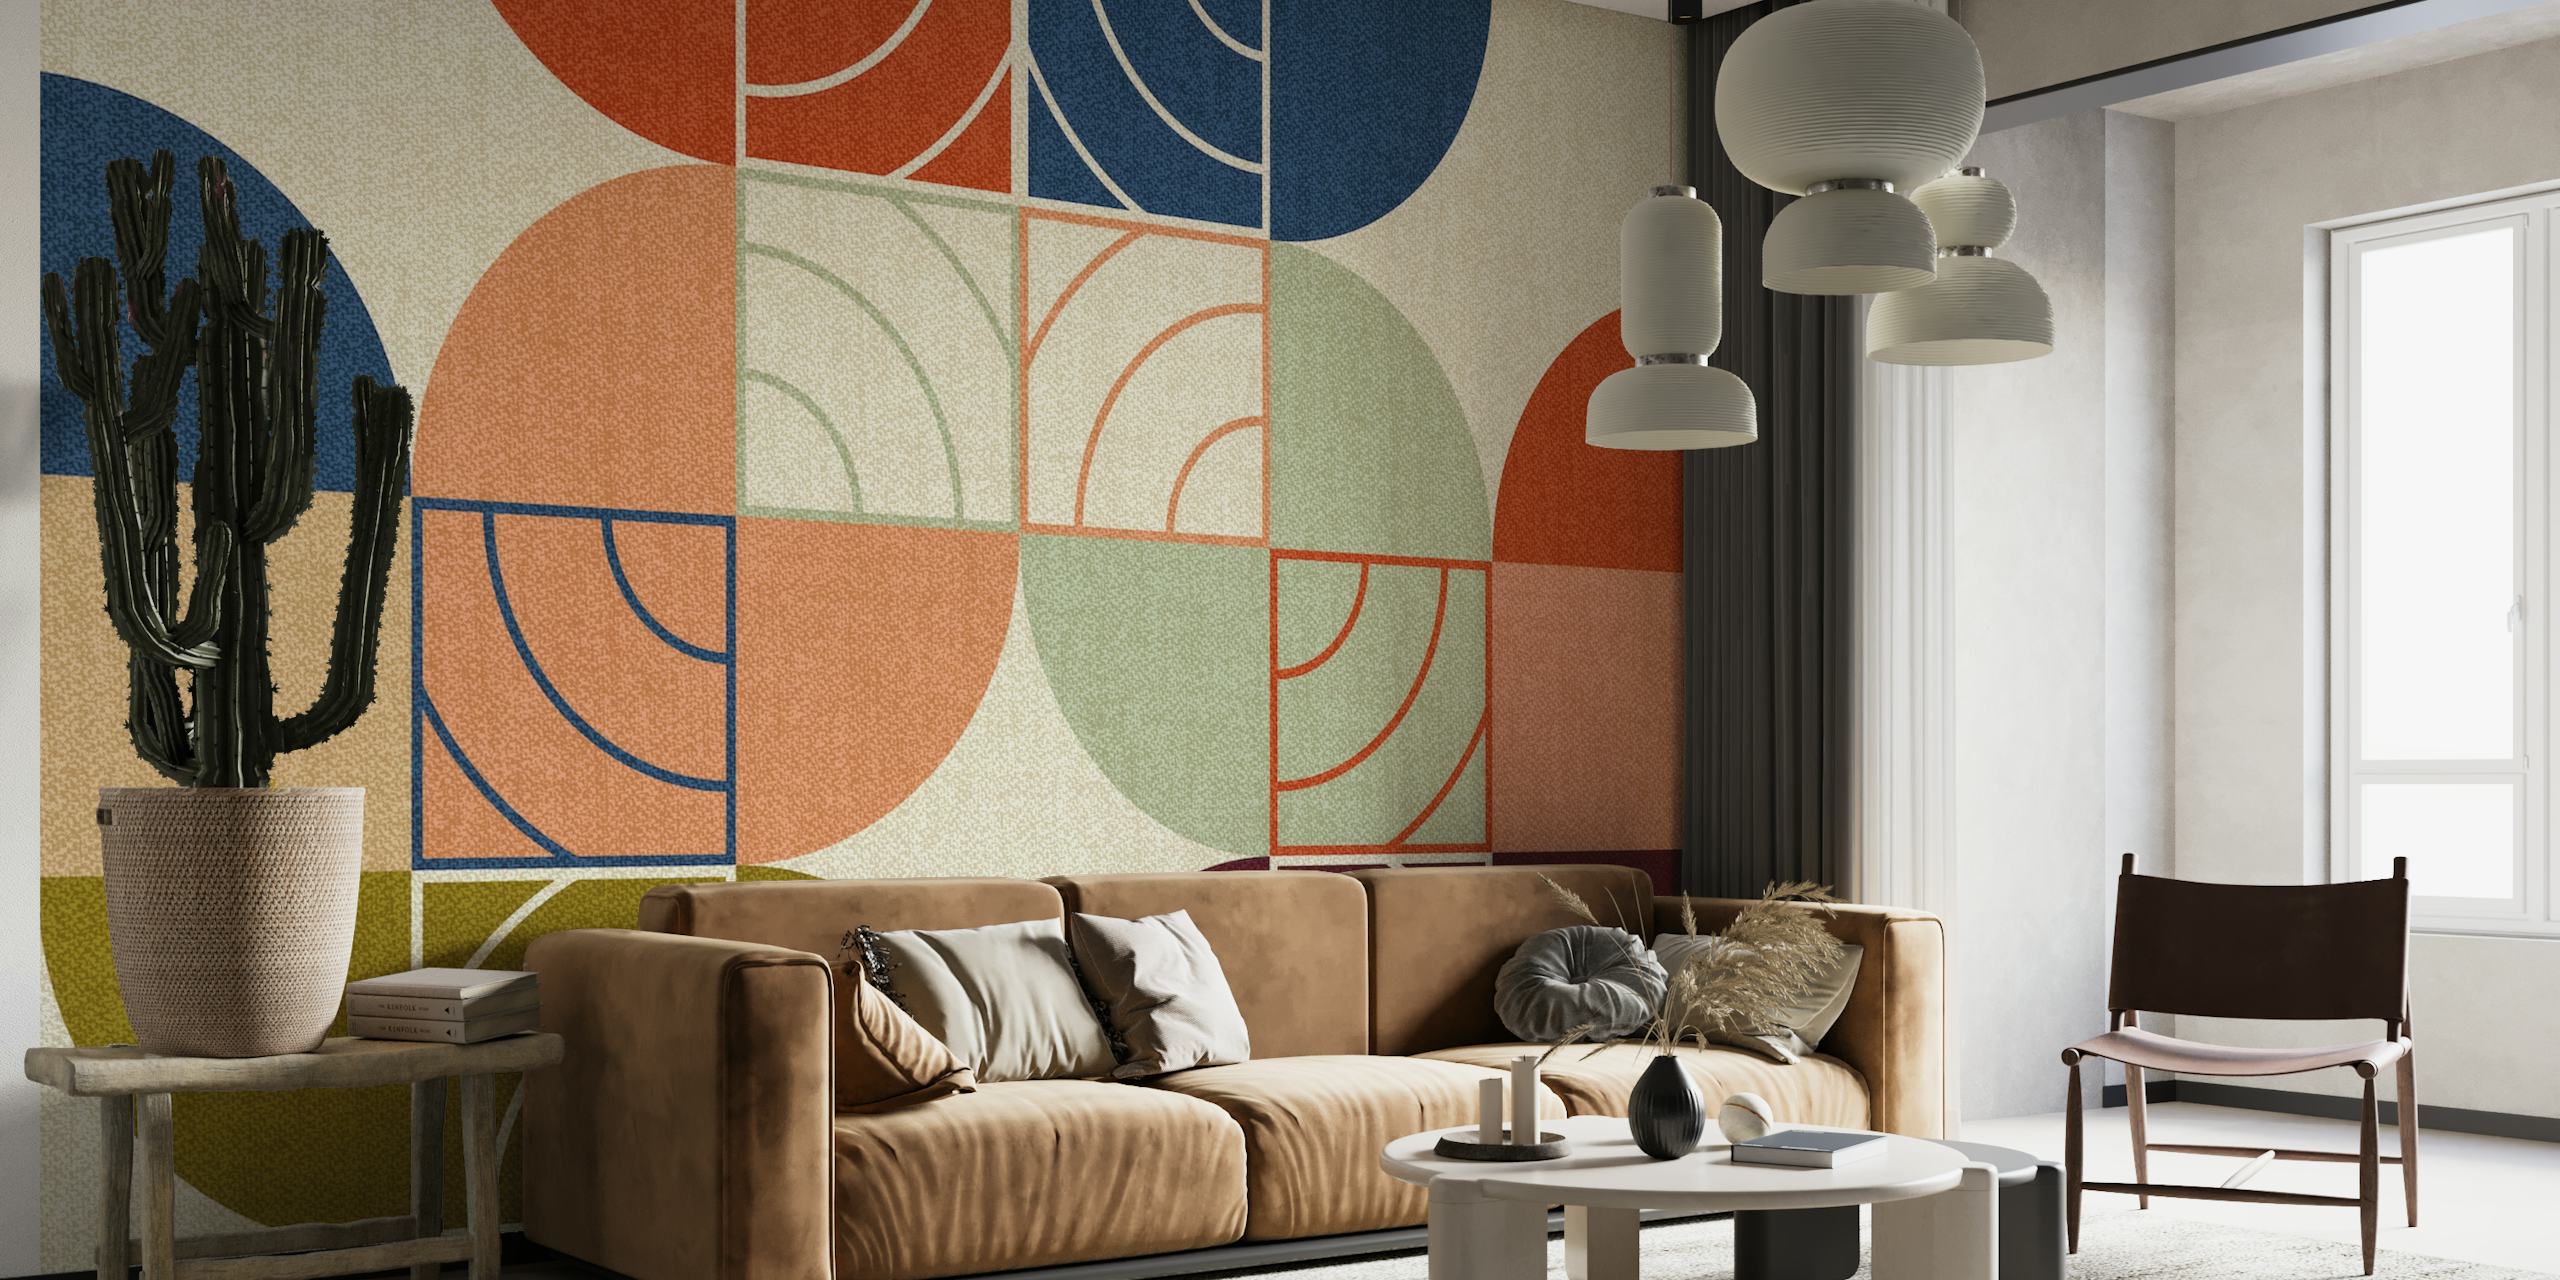 Geometric shapes wall mural in Art Deco and Bauhaus style with earthy tones